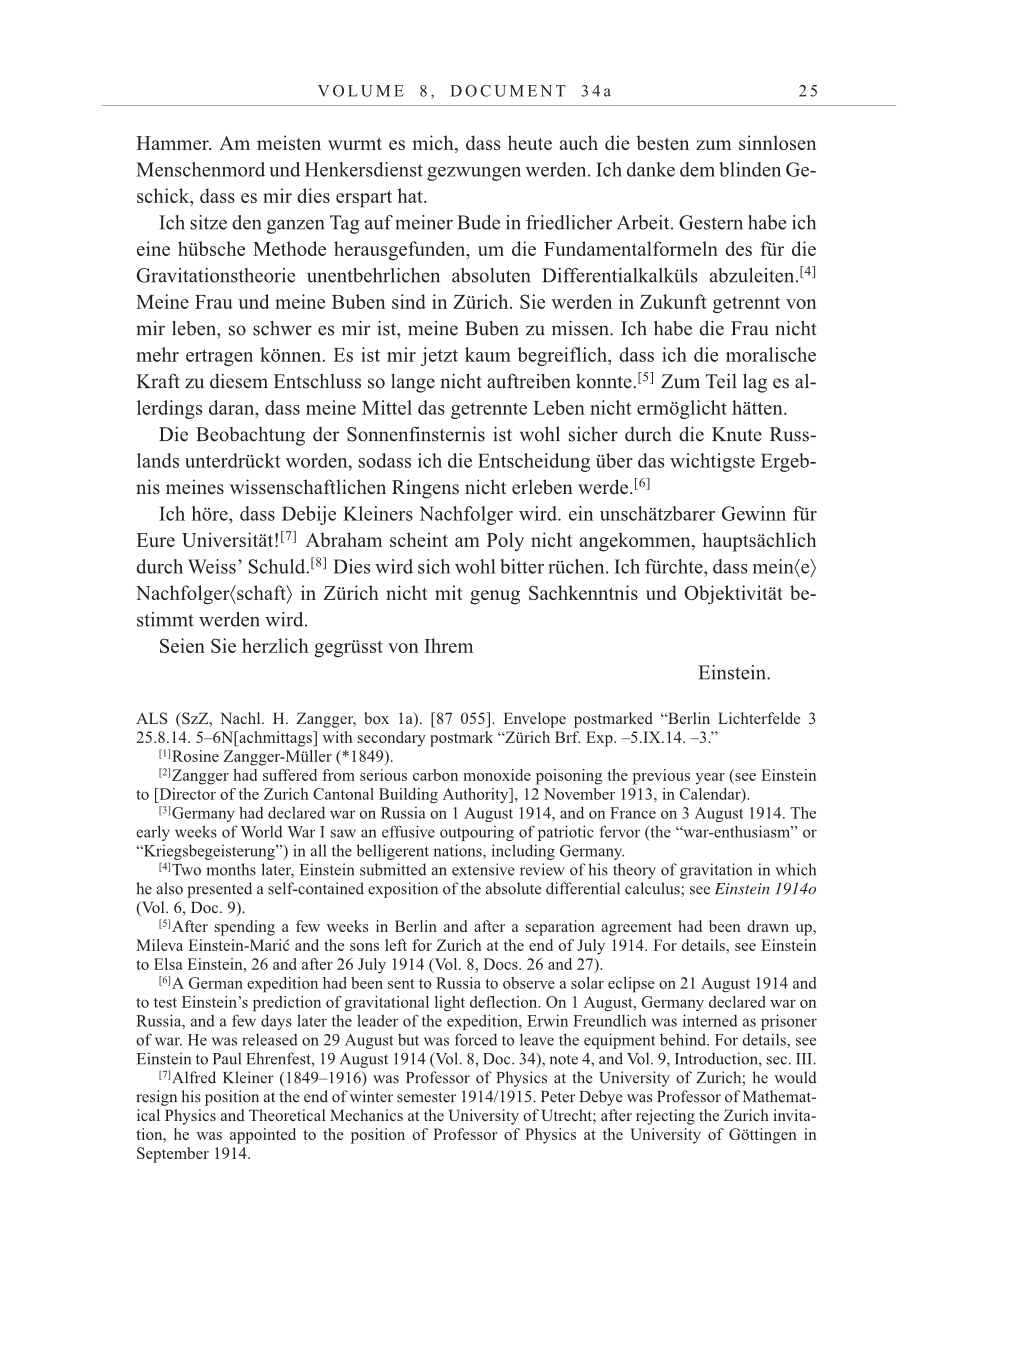 Volume 10: The Berlin Years: Correspondence May-December 1920 / Supplementary Correspondence 1909-1920 page 25